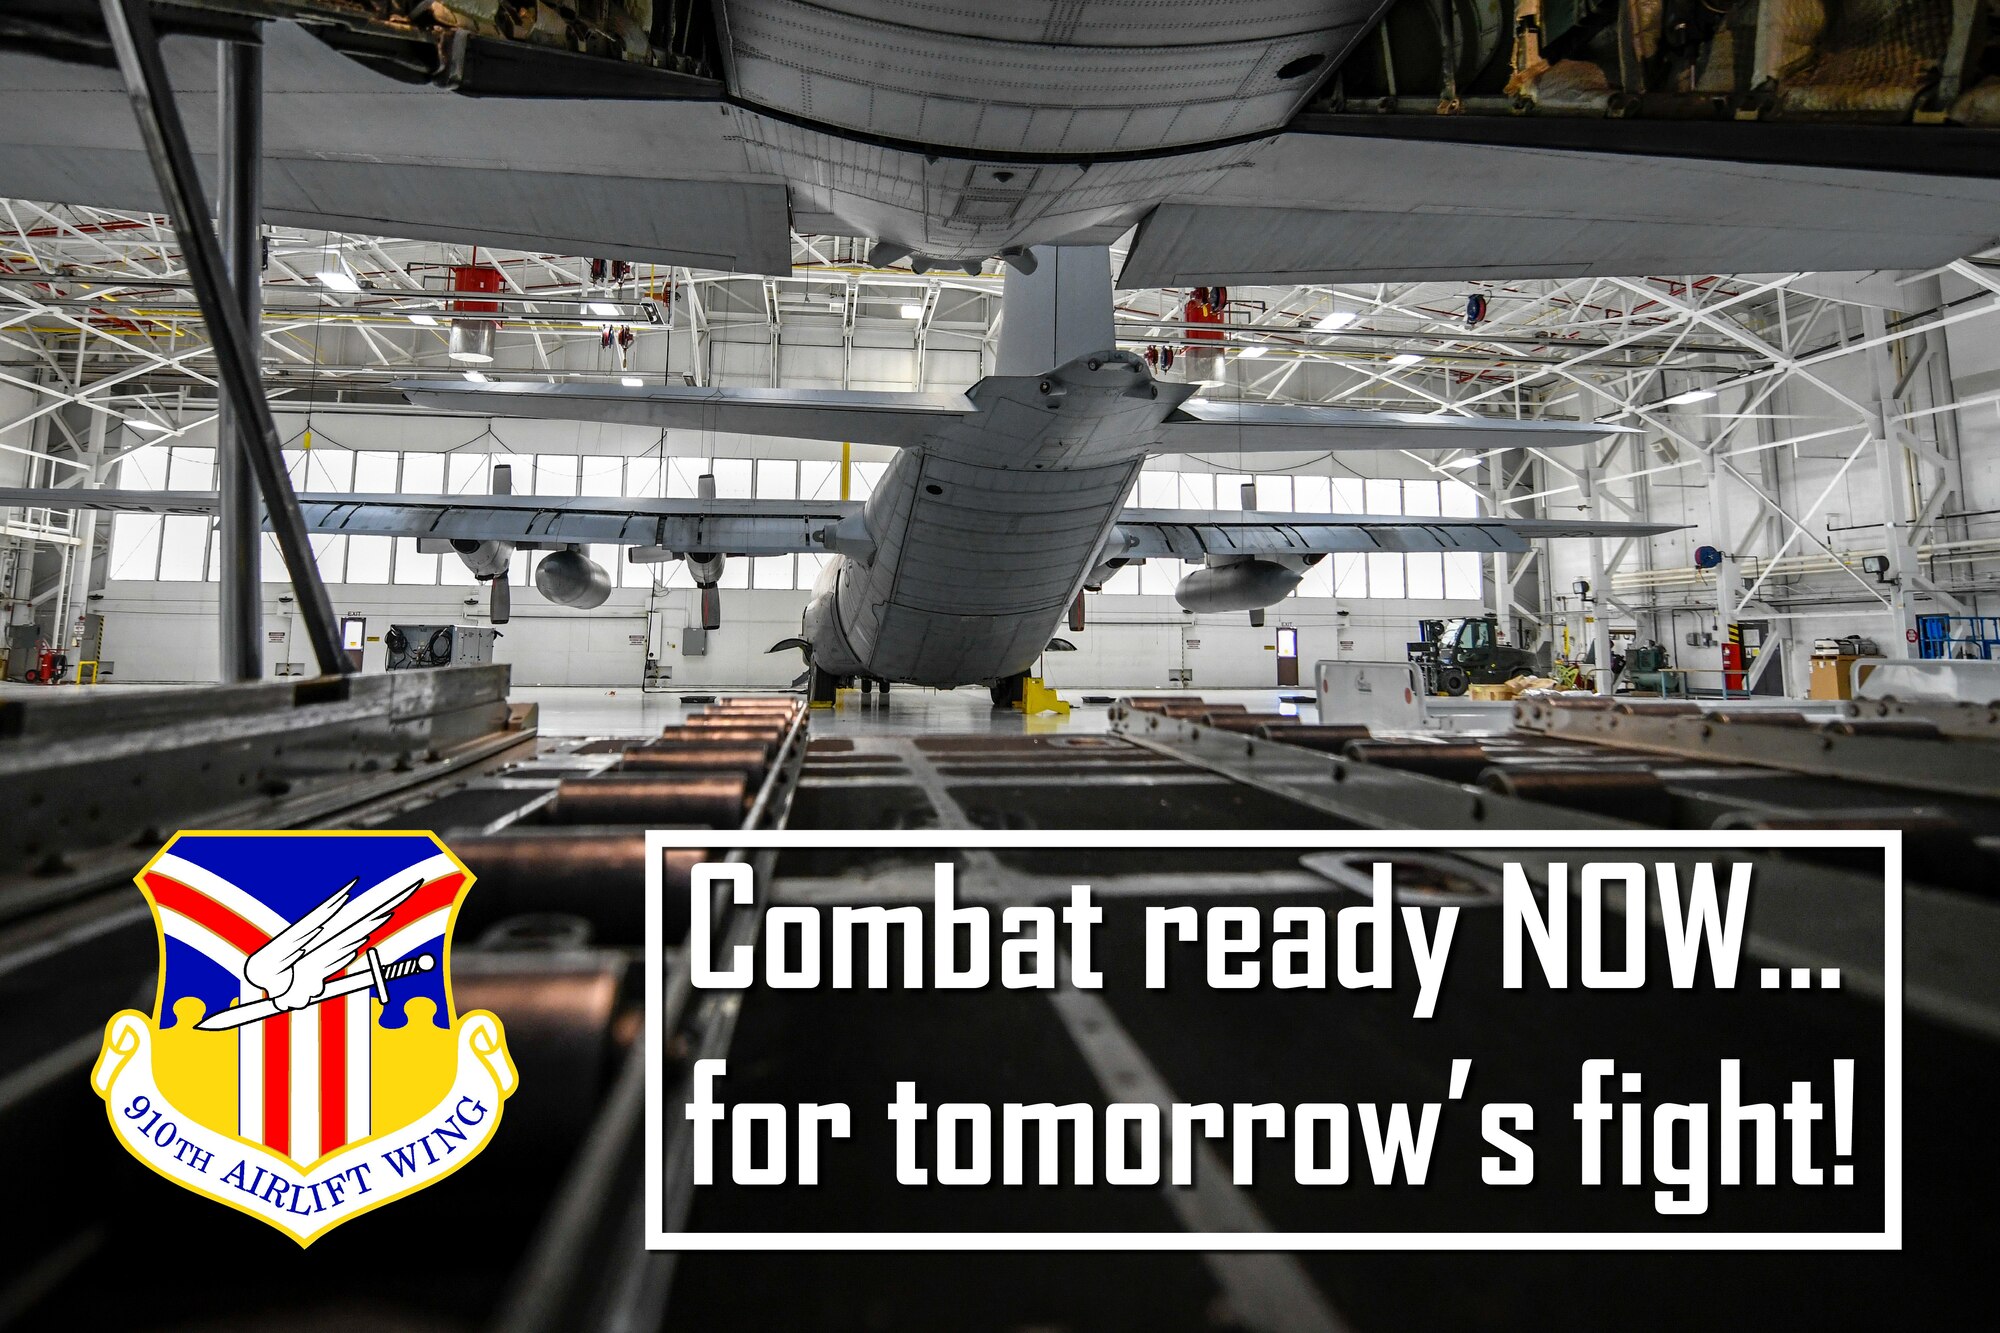 The new year brings with it a new mission statement. On Dec. 17, 2019, during a multi-day workshop, the 910th Airlift Wing leaders discussed the mission, vision and priorities of the unit resulting in a new mission statement: Combat ready NOW...for tomorrow's fight.